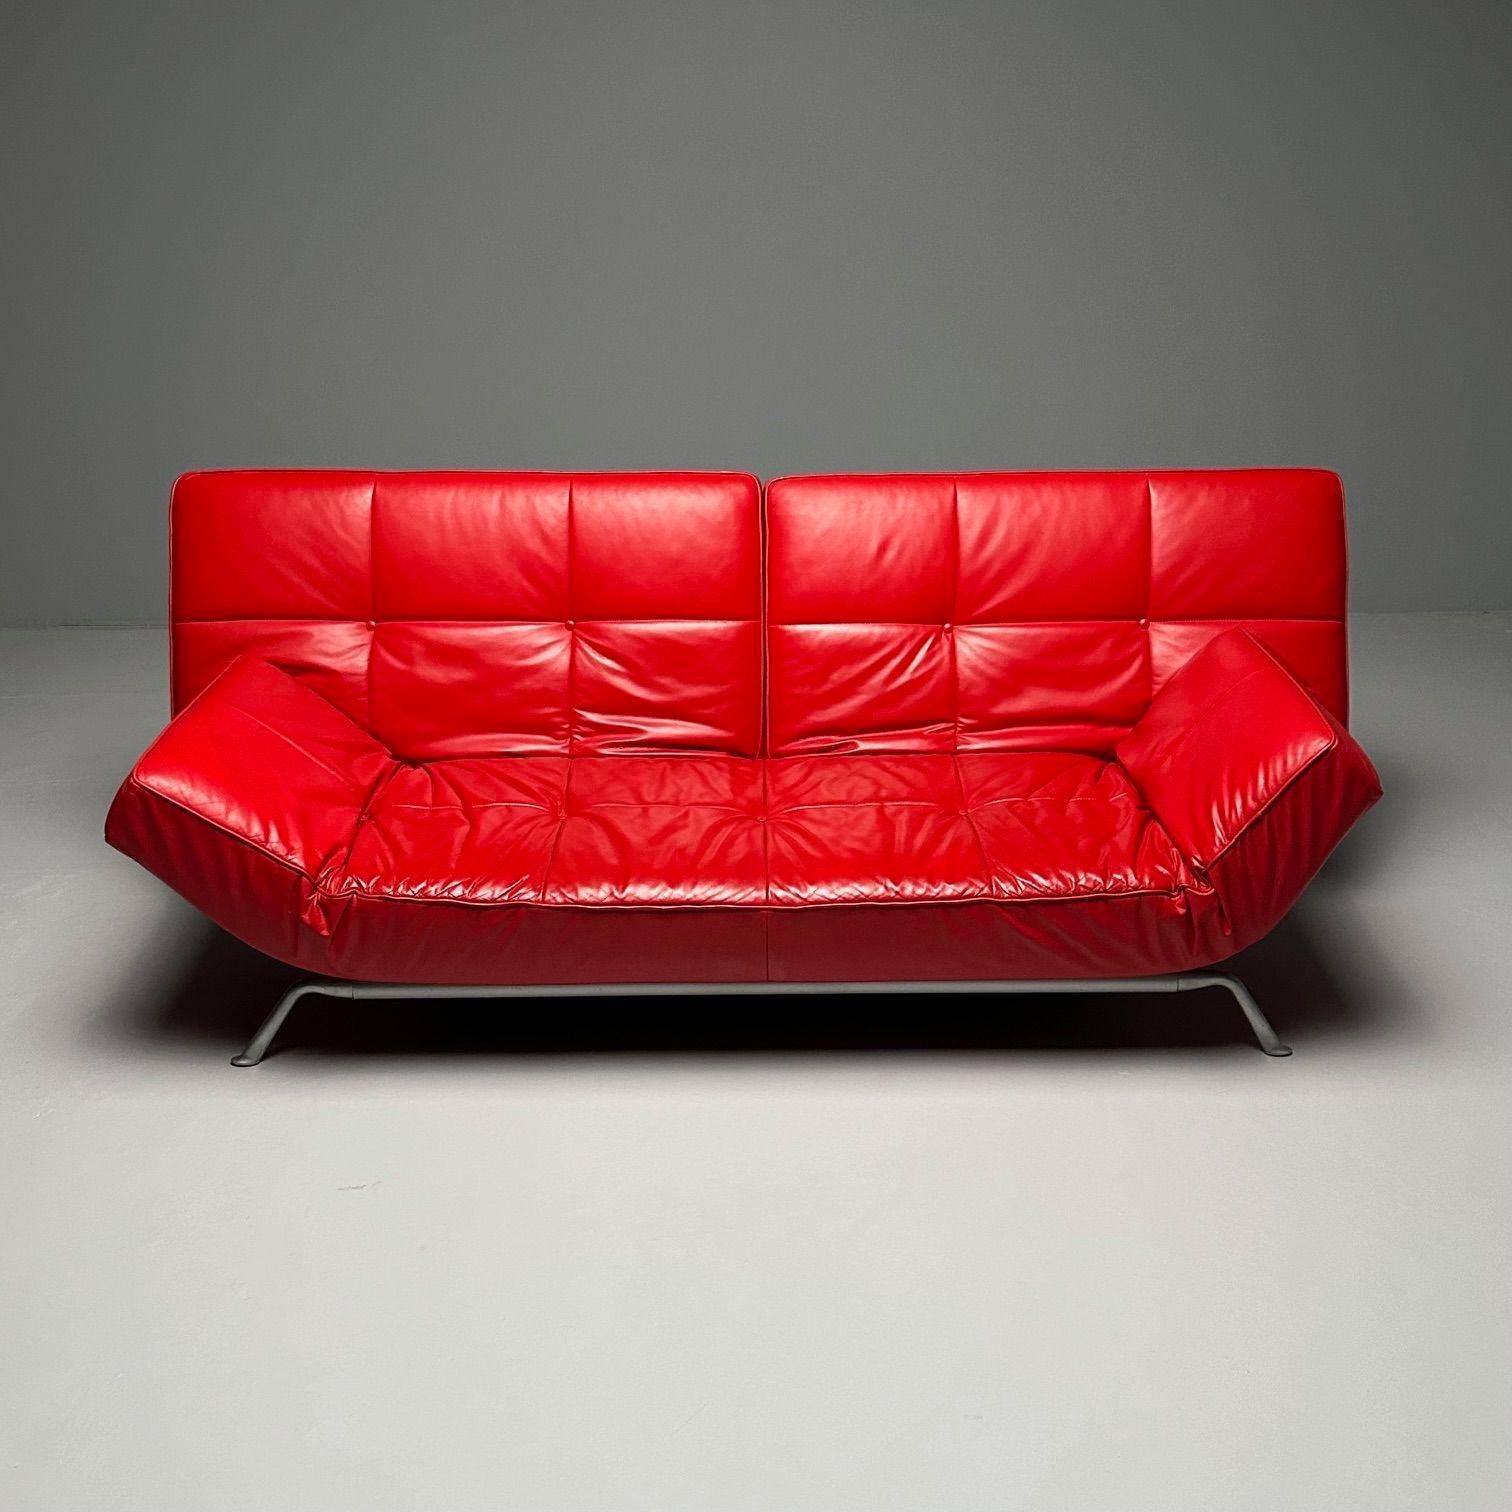 Smala by Ligne Roset Adjustable Daybed Sofa in Red Leather, Pascal Mourgue

Made in France by Ligne Roset, this iconic adjustable daybed / sofa in luxurious Fire engine red leather is as chic as it is versatile. Clean lines, generous proportions and